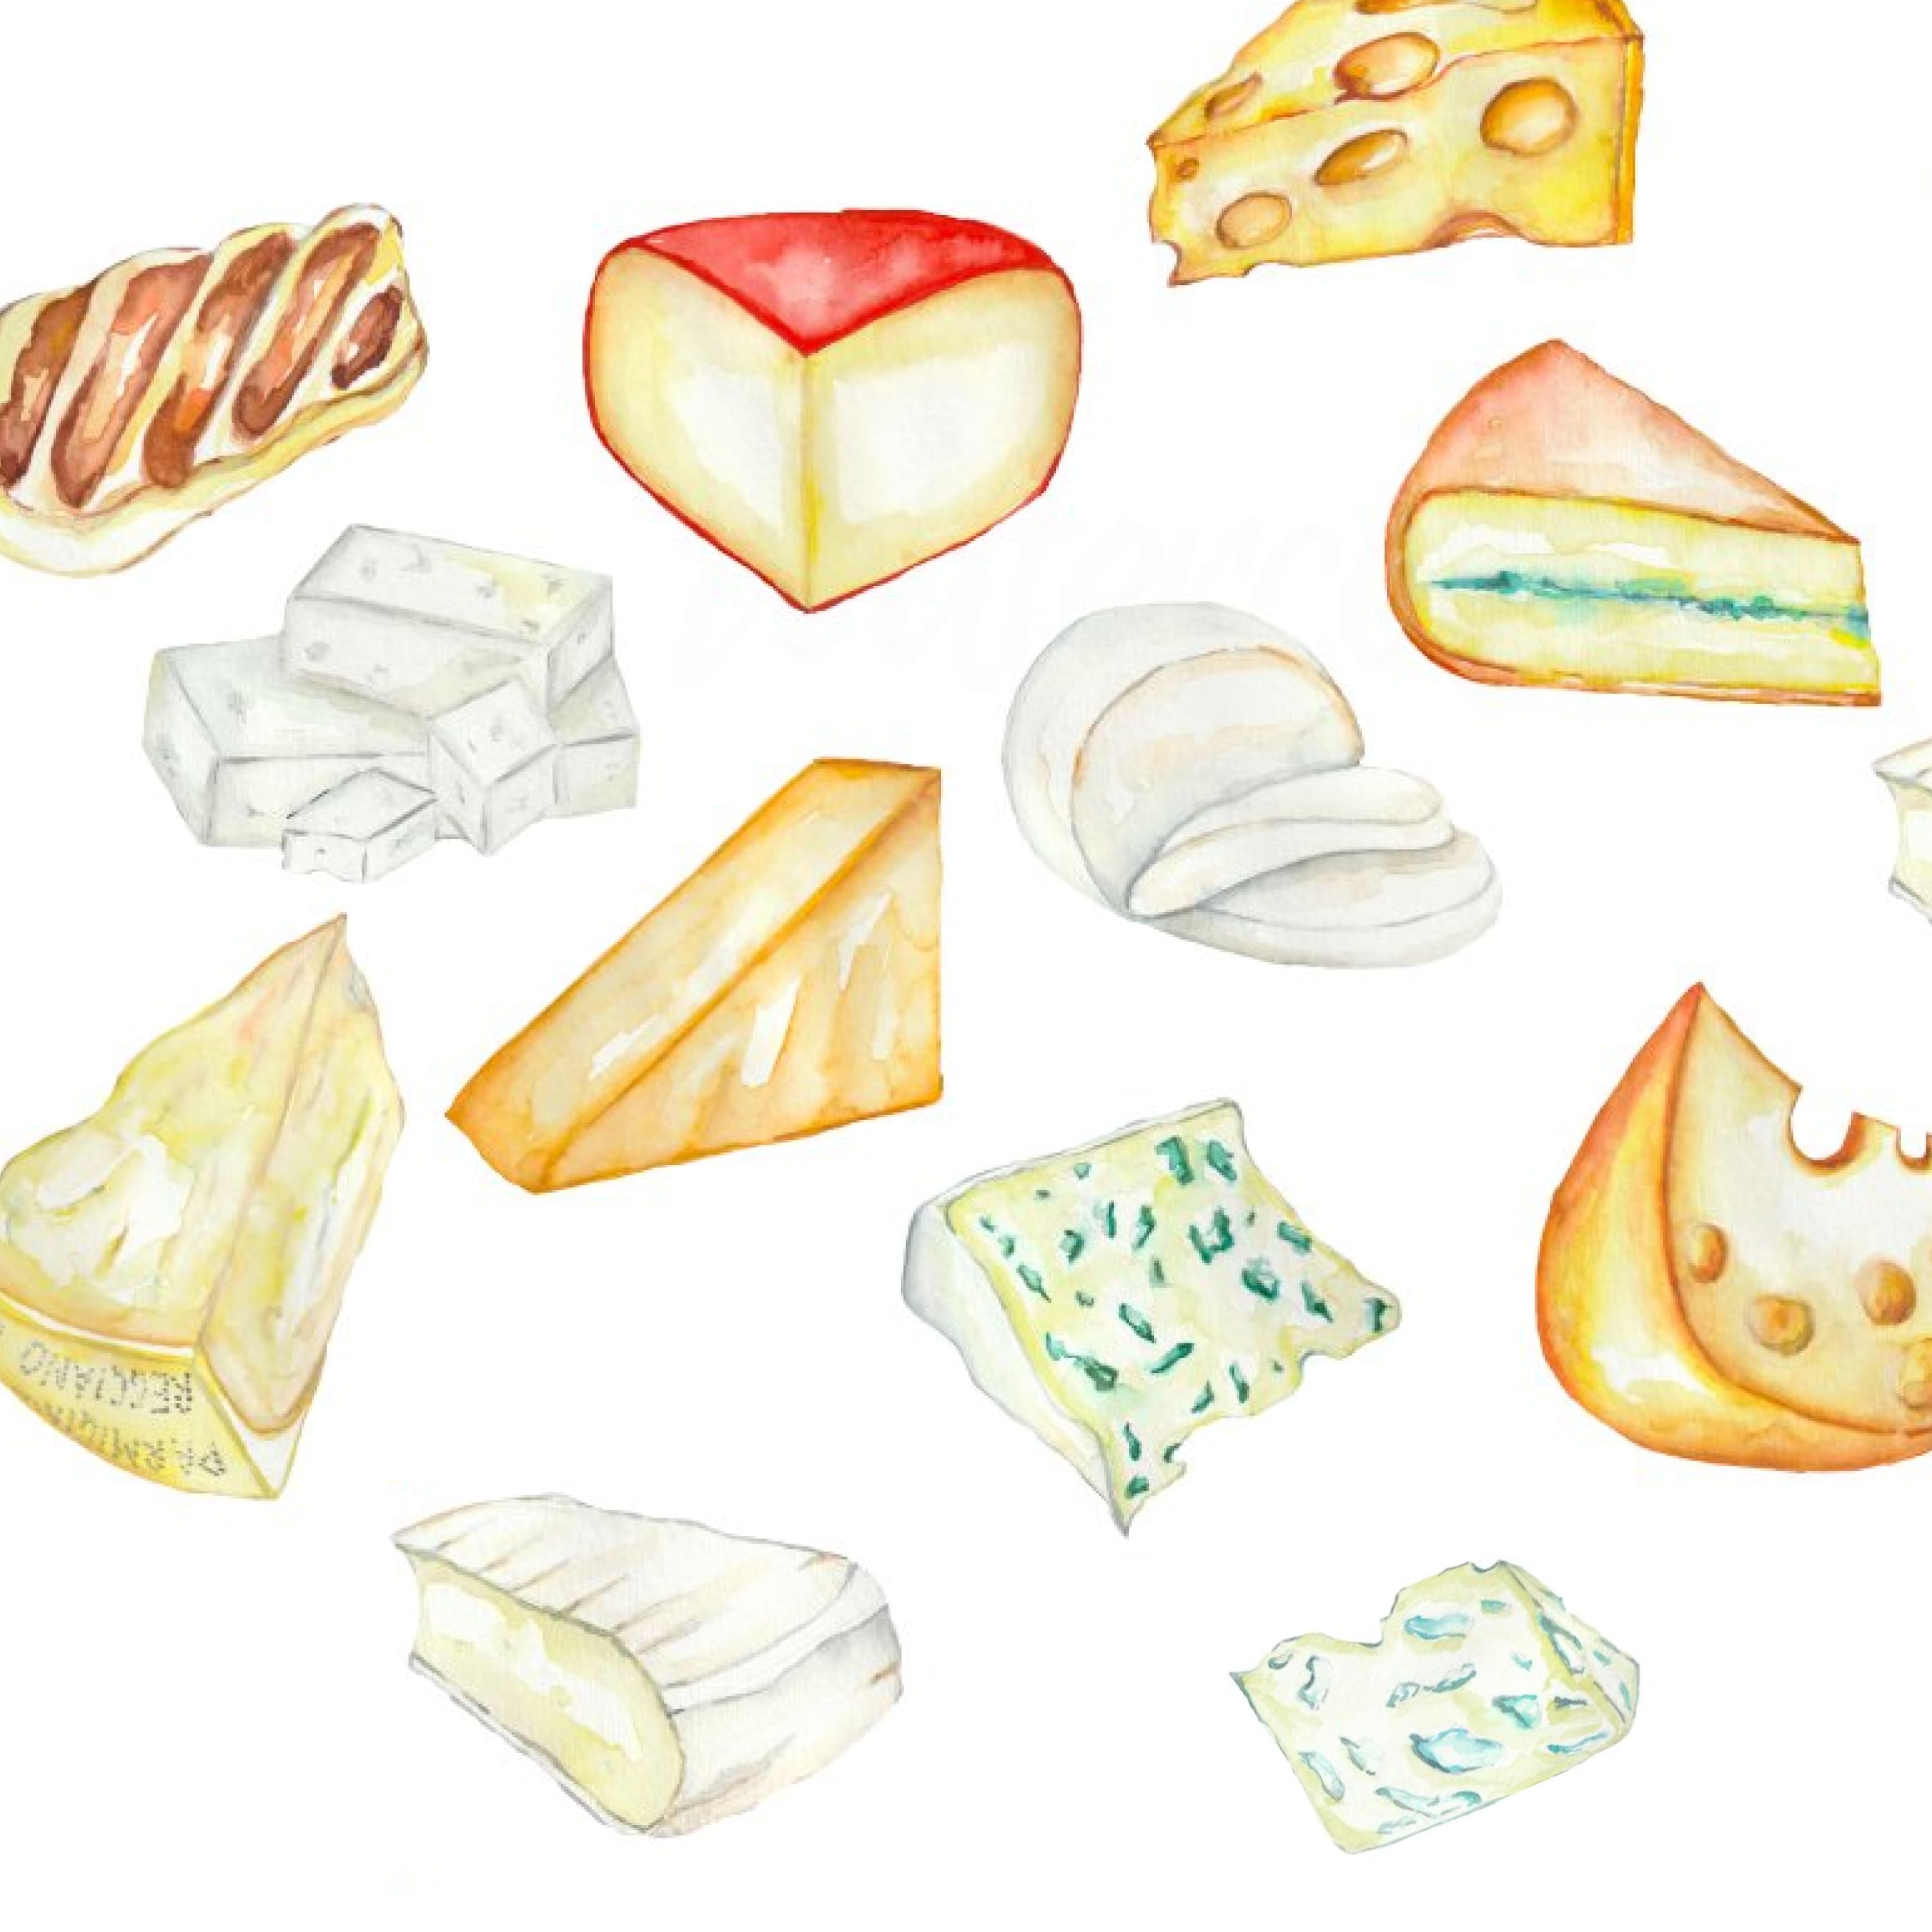 Set of cartoon images of french cheeses.